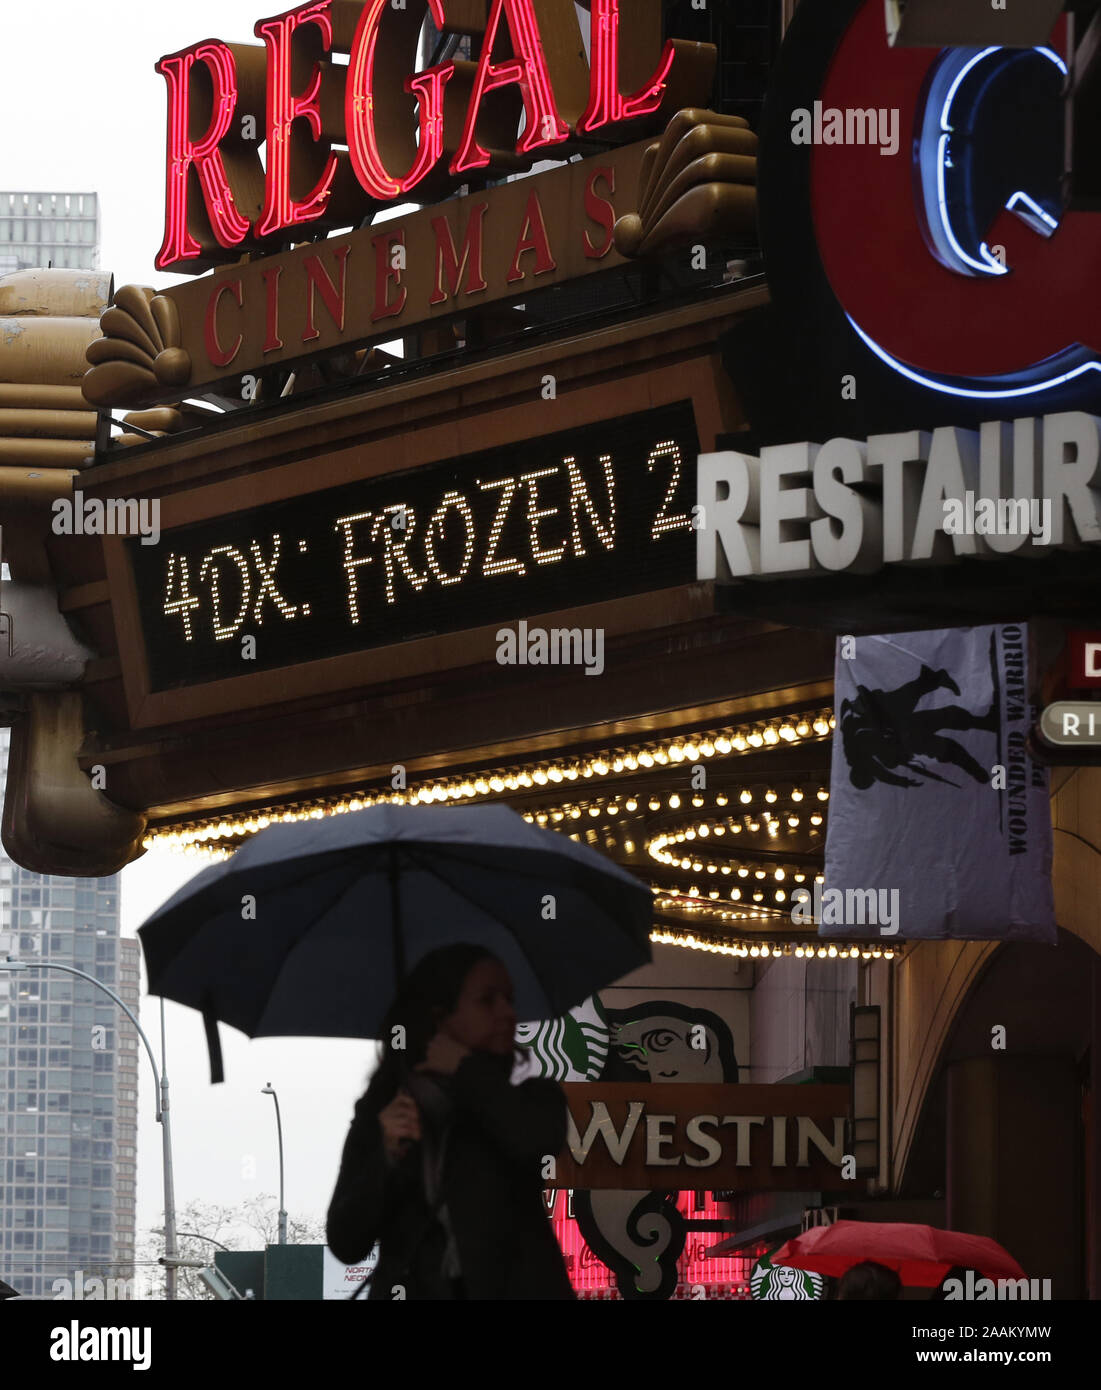 Signs for the Disney animated film 'Frozen 2' are on display outside at a Movie Theater in New York City on Friday, November 22, 2019. Frozen 2 hit theaters Nov. 22 in the US and UK and Dec. 26 in Australia. Frozen 2, the sequel to Disney's 2013 animated hit Frozen.    Photo by John Angelillo/UPI Stock Photo